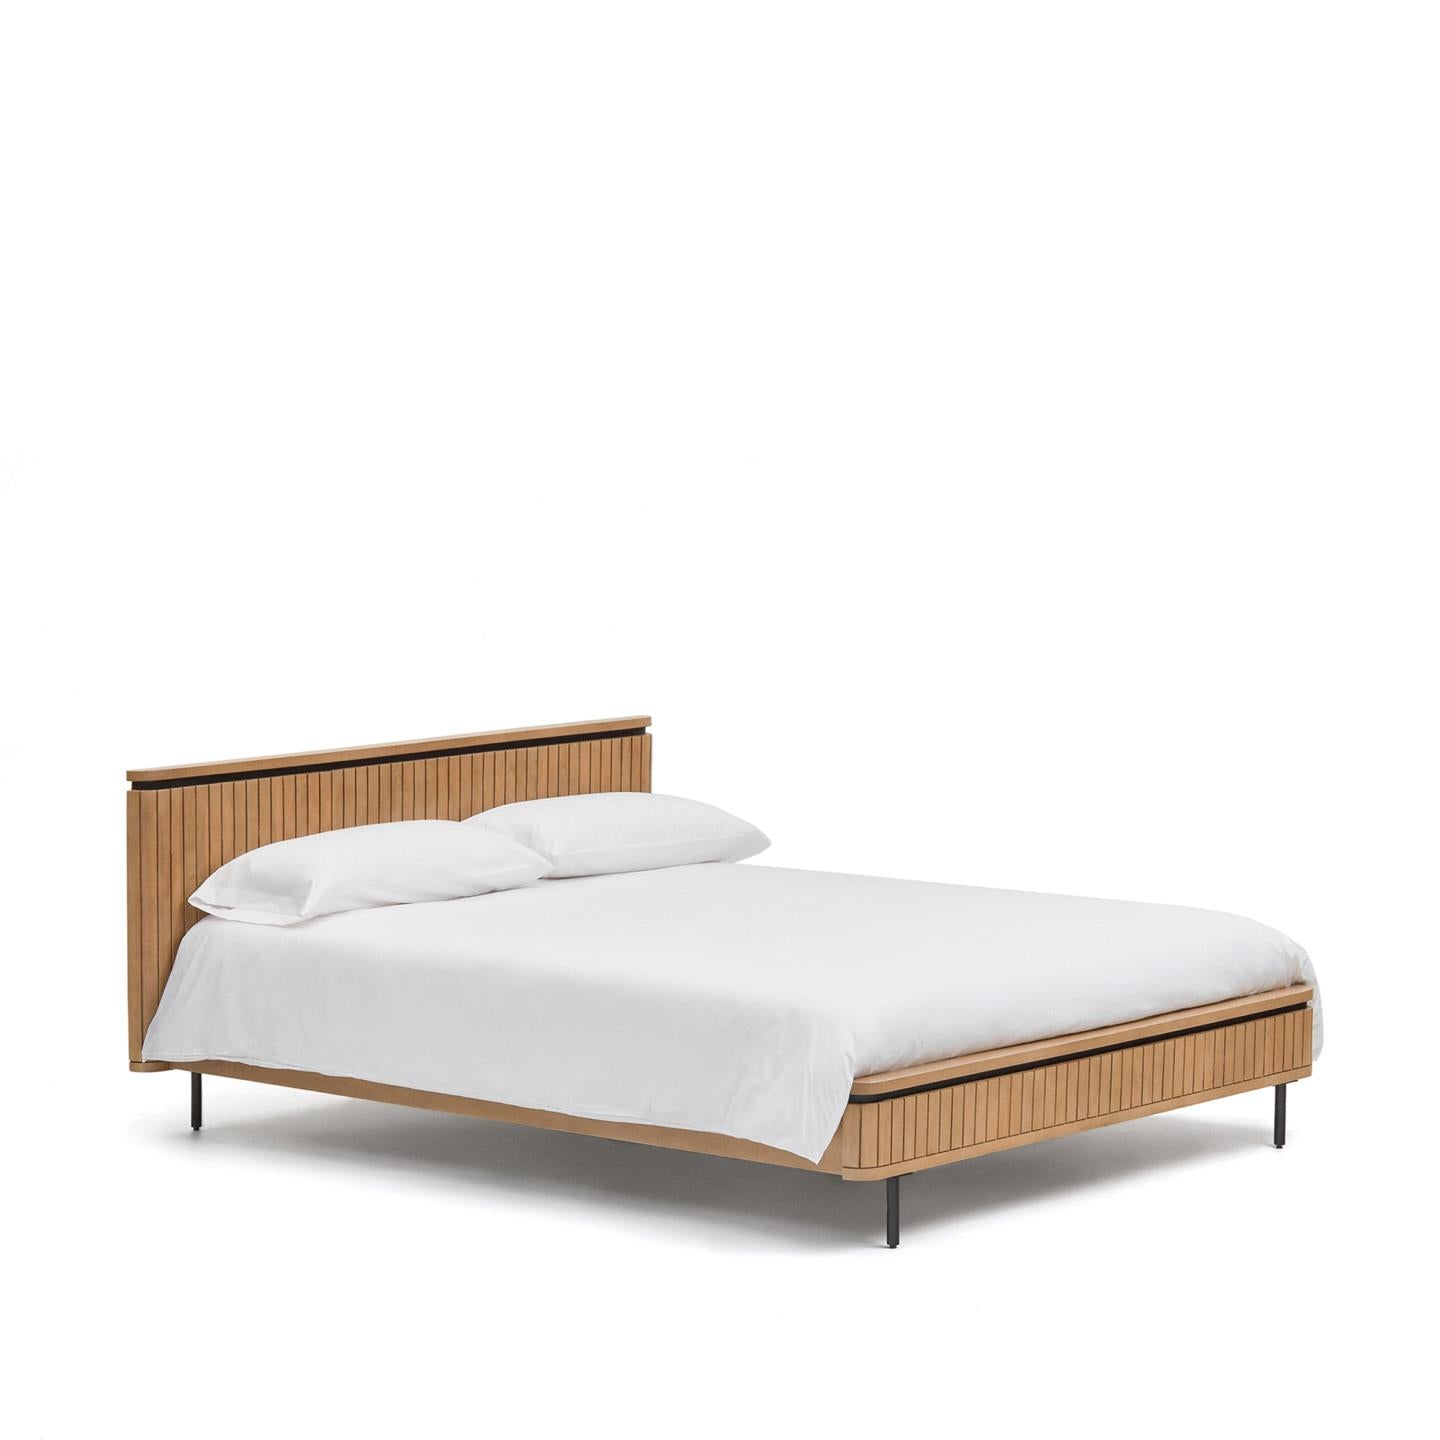 Lucia Super King Size Bed Made From Solid Mango Wood